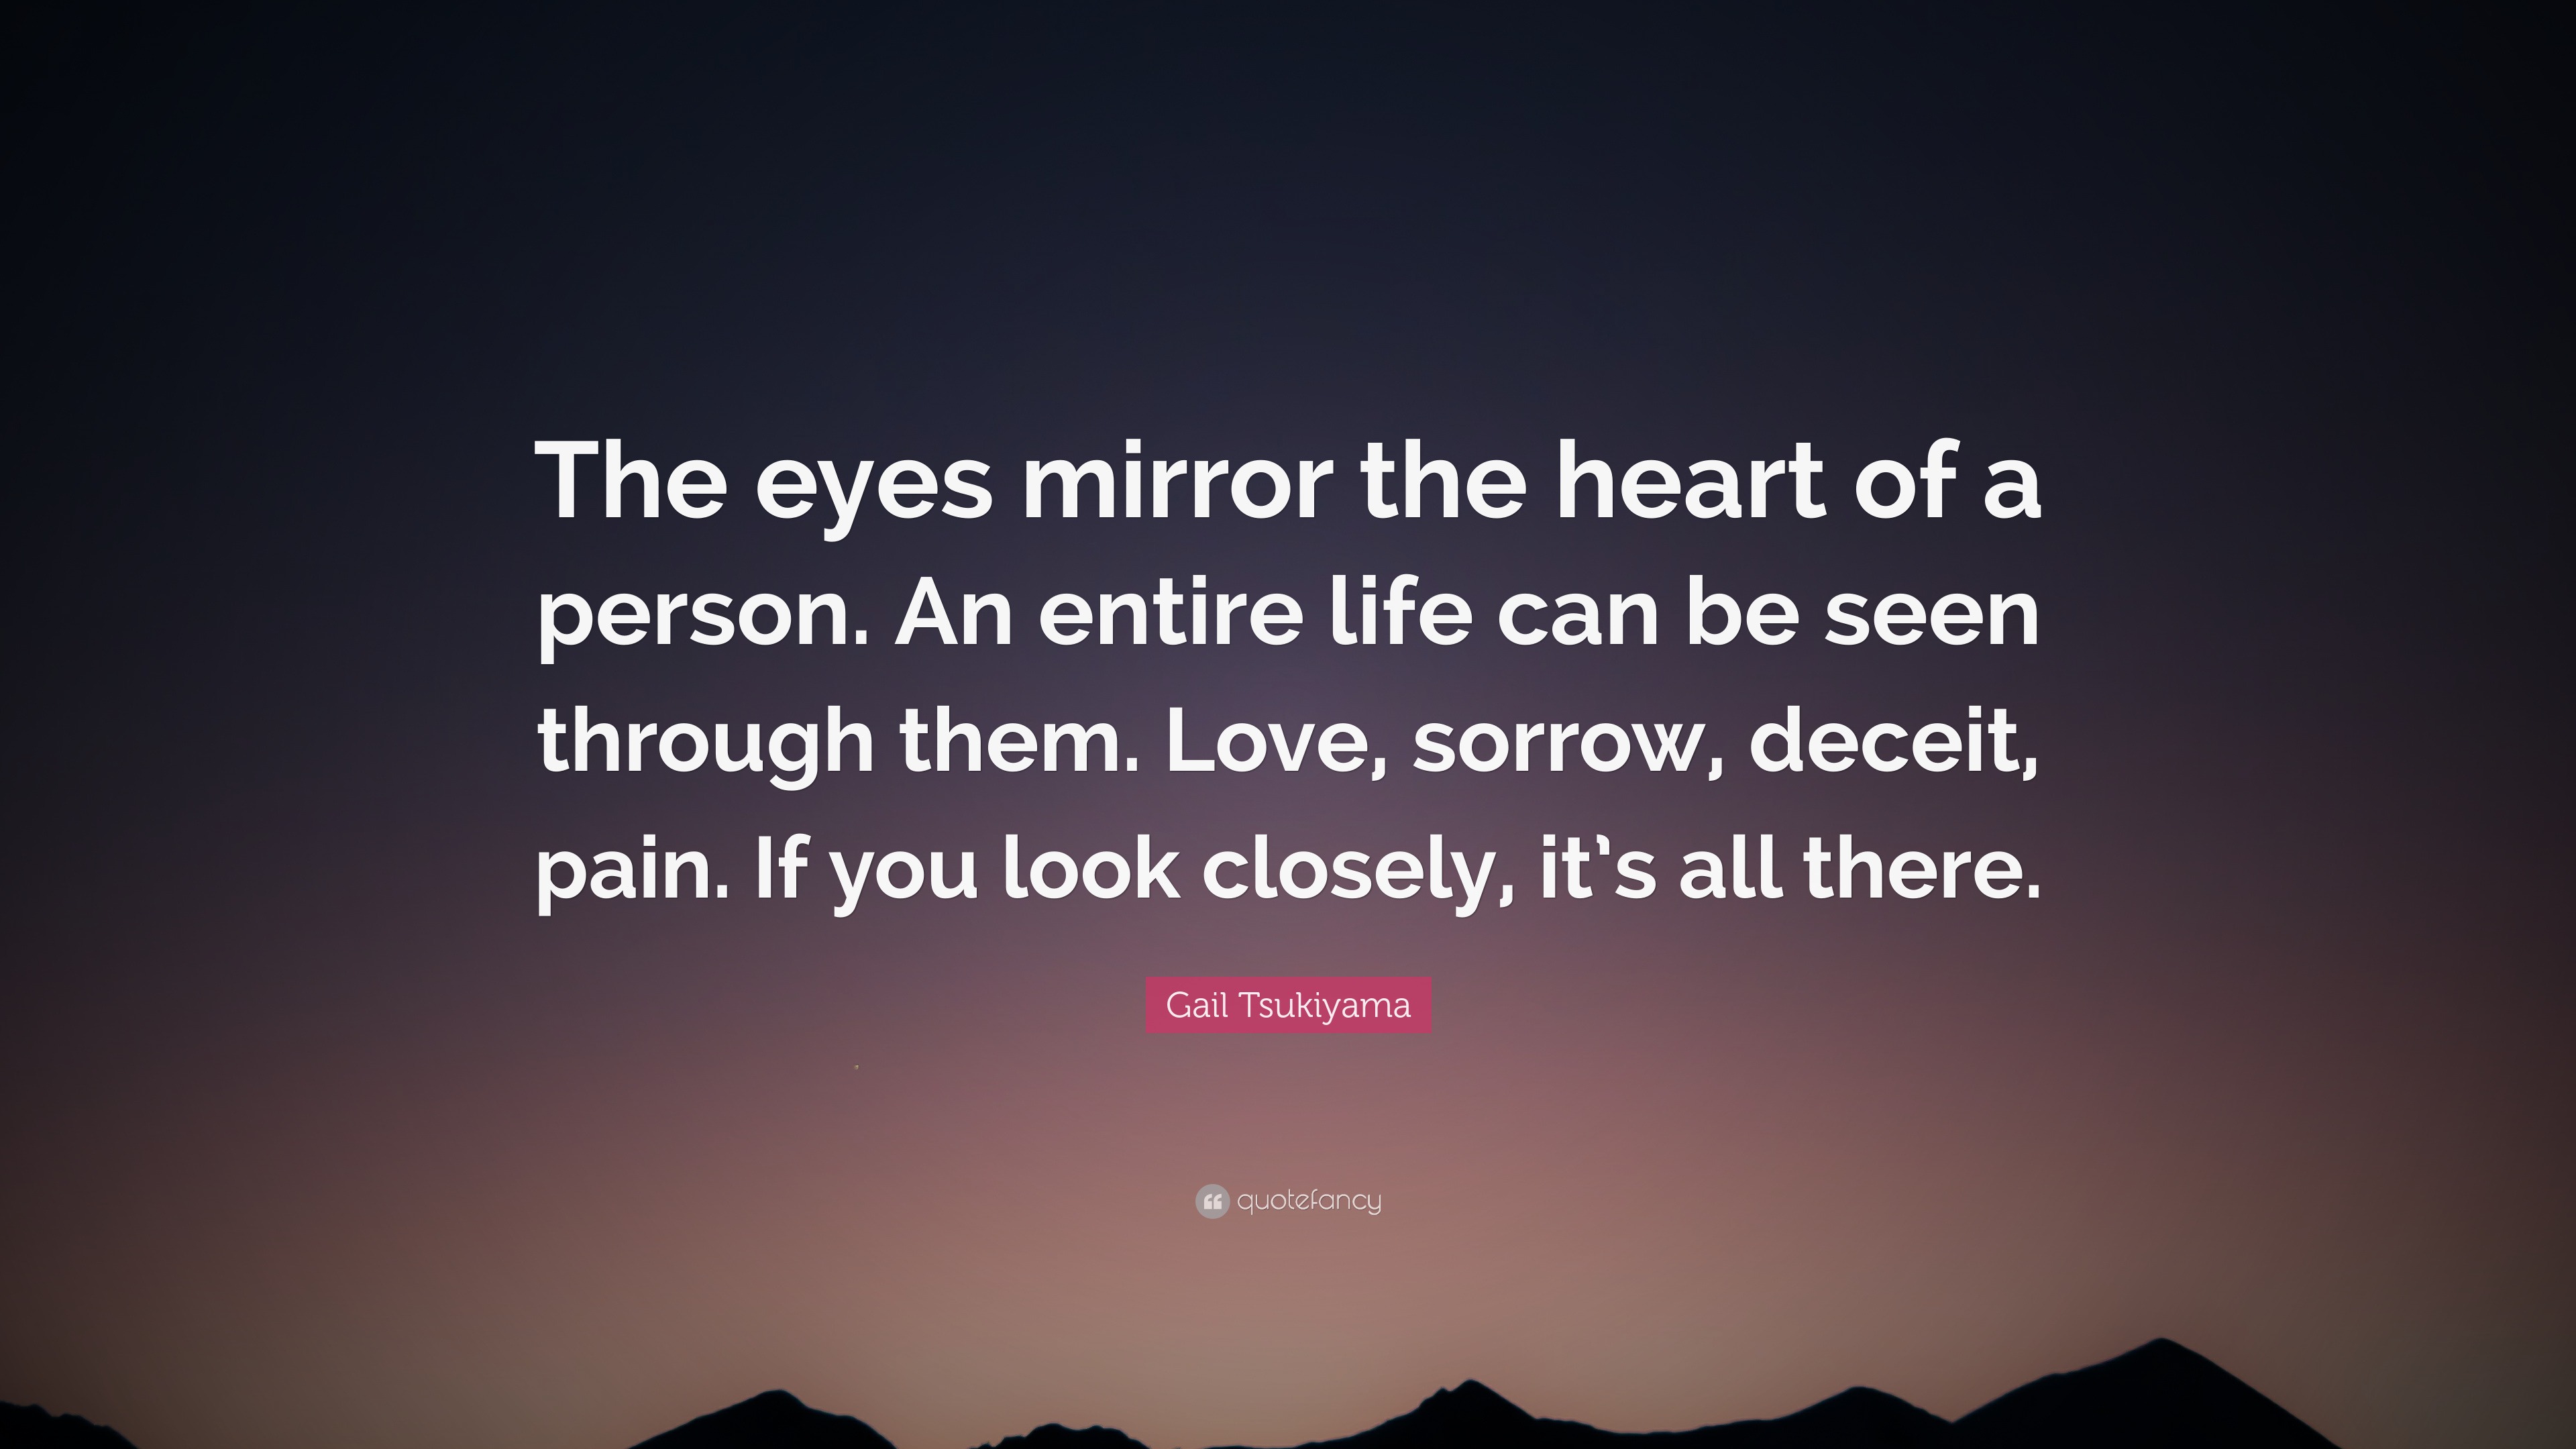 Gail Tsukiyama Quote: “The eyes mirror the heart of a person. An entire ...